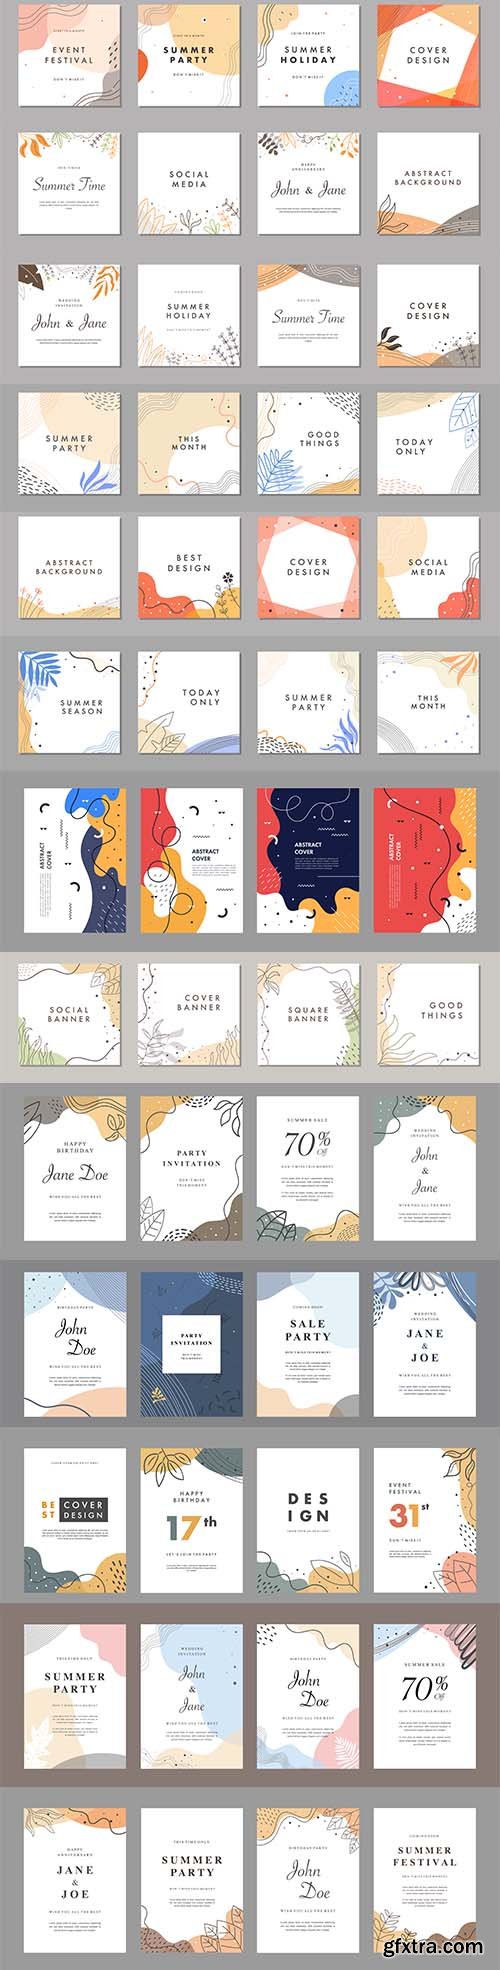 Bundle of Creative Universal Cover Templates